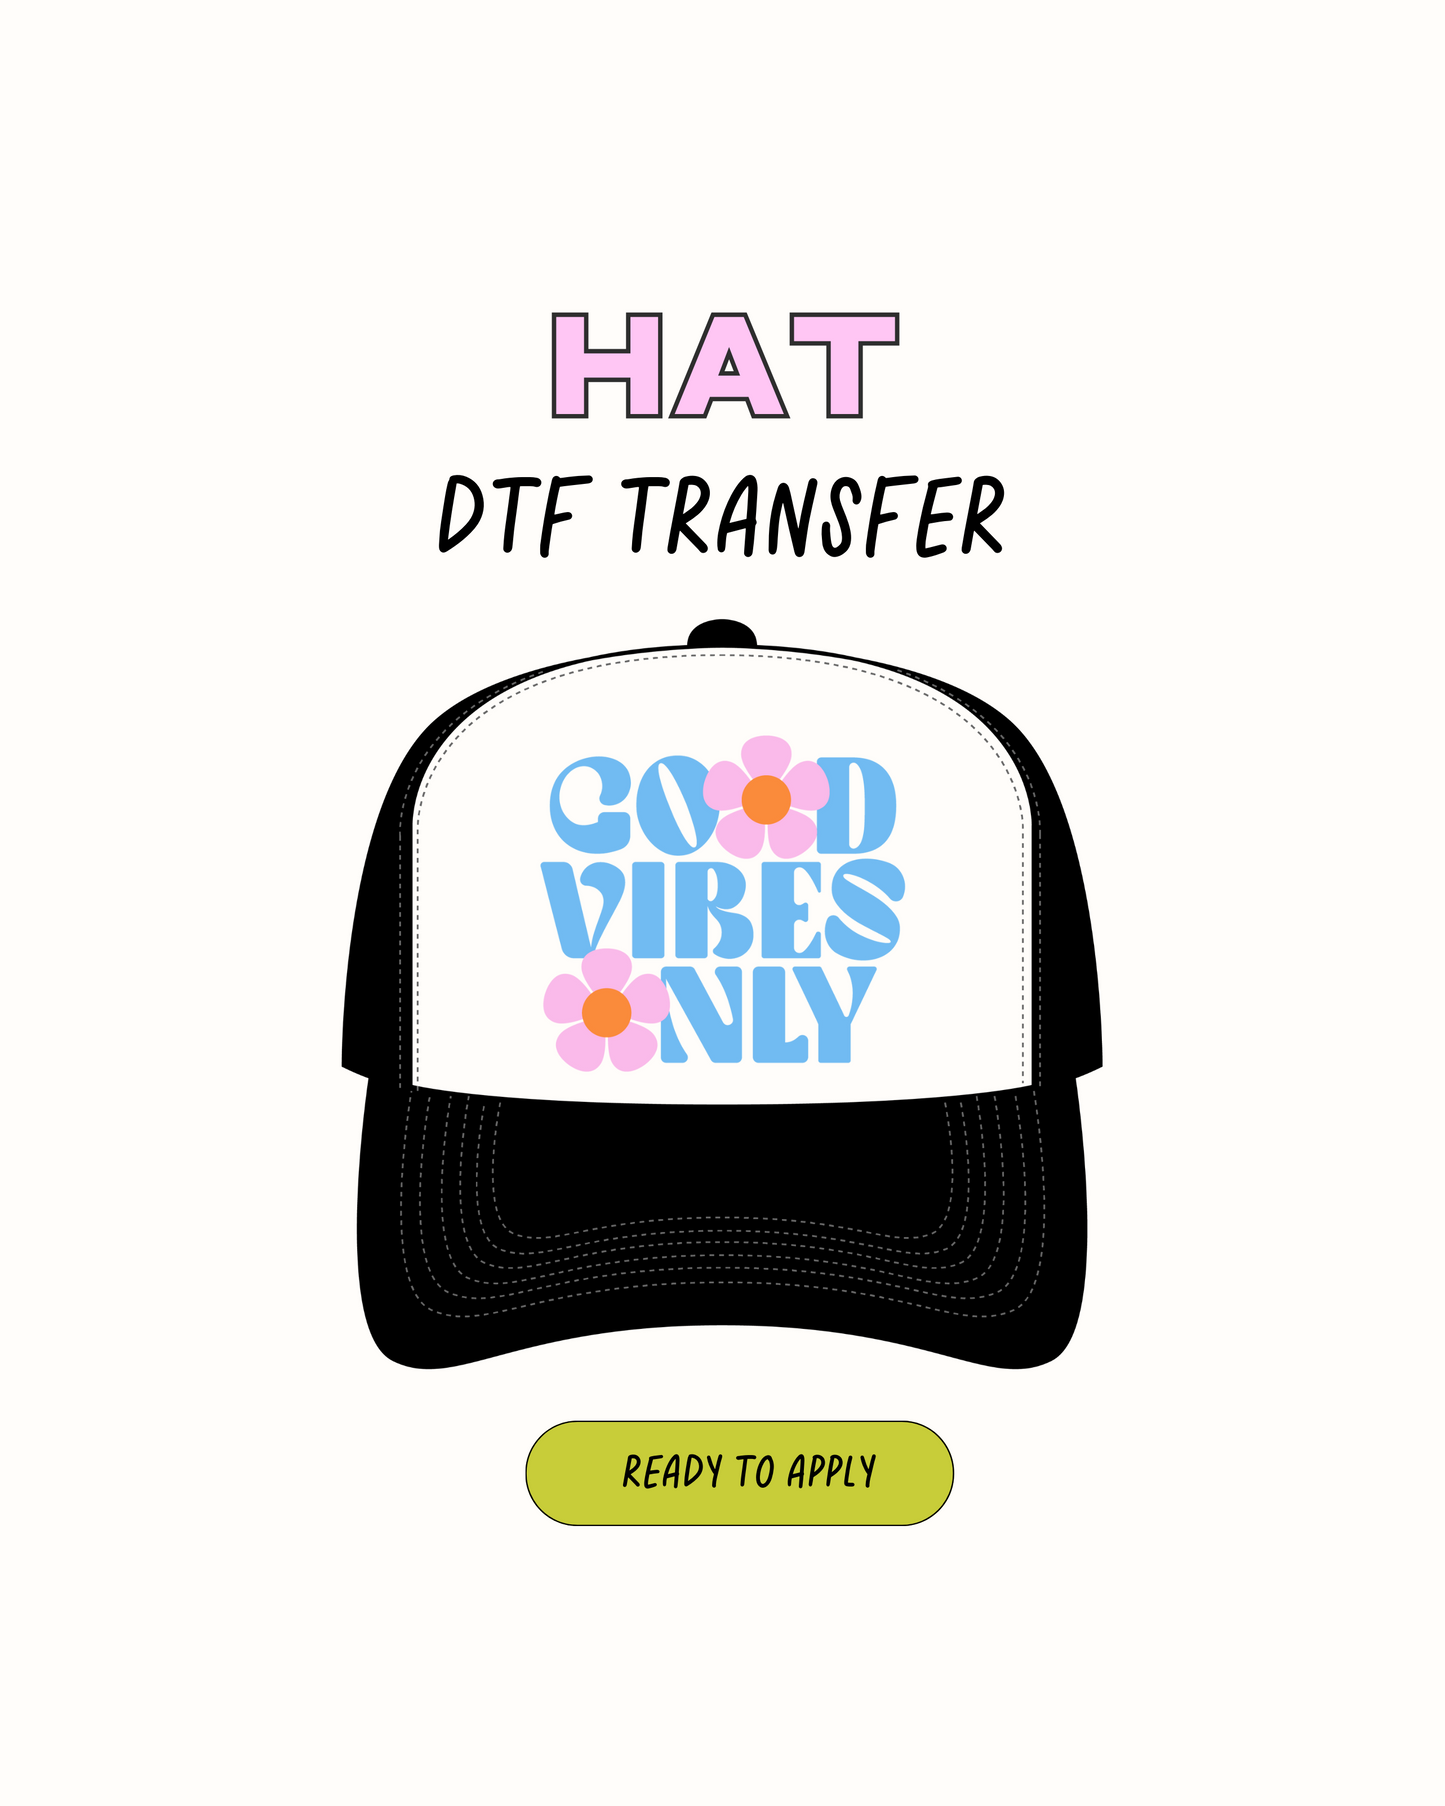 Good vibes - DTF Hat Transfers